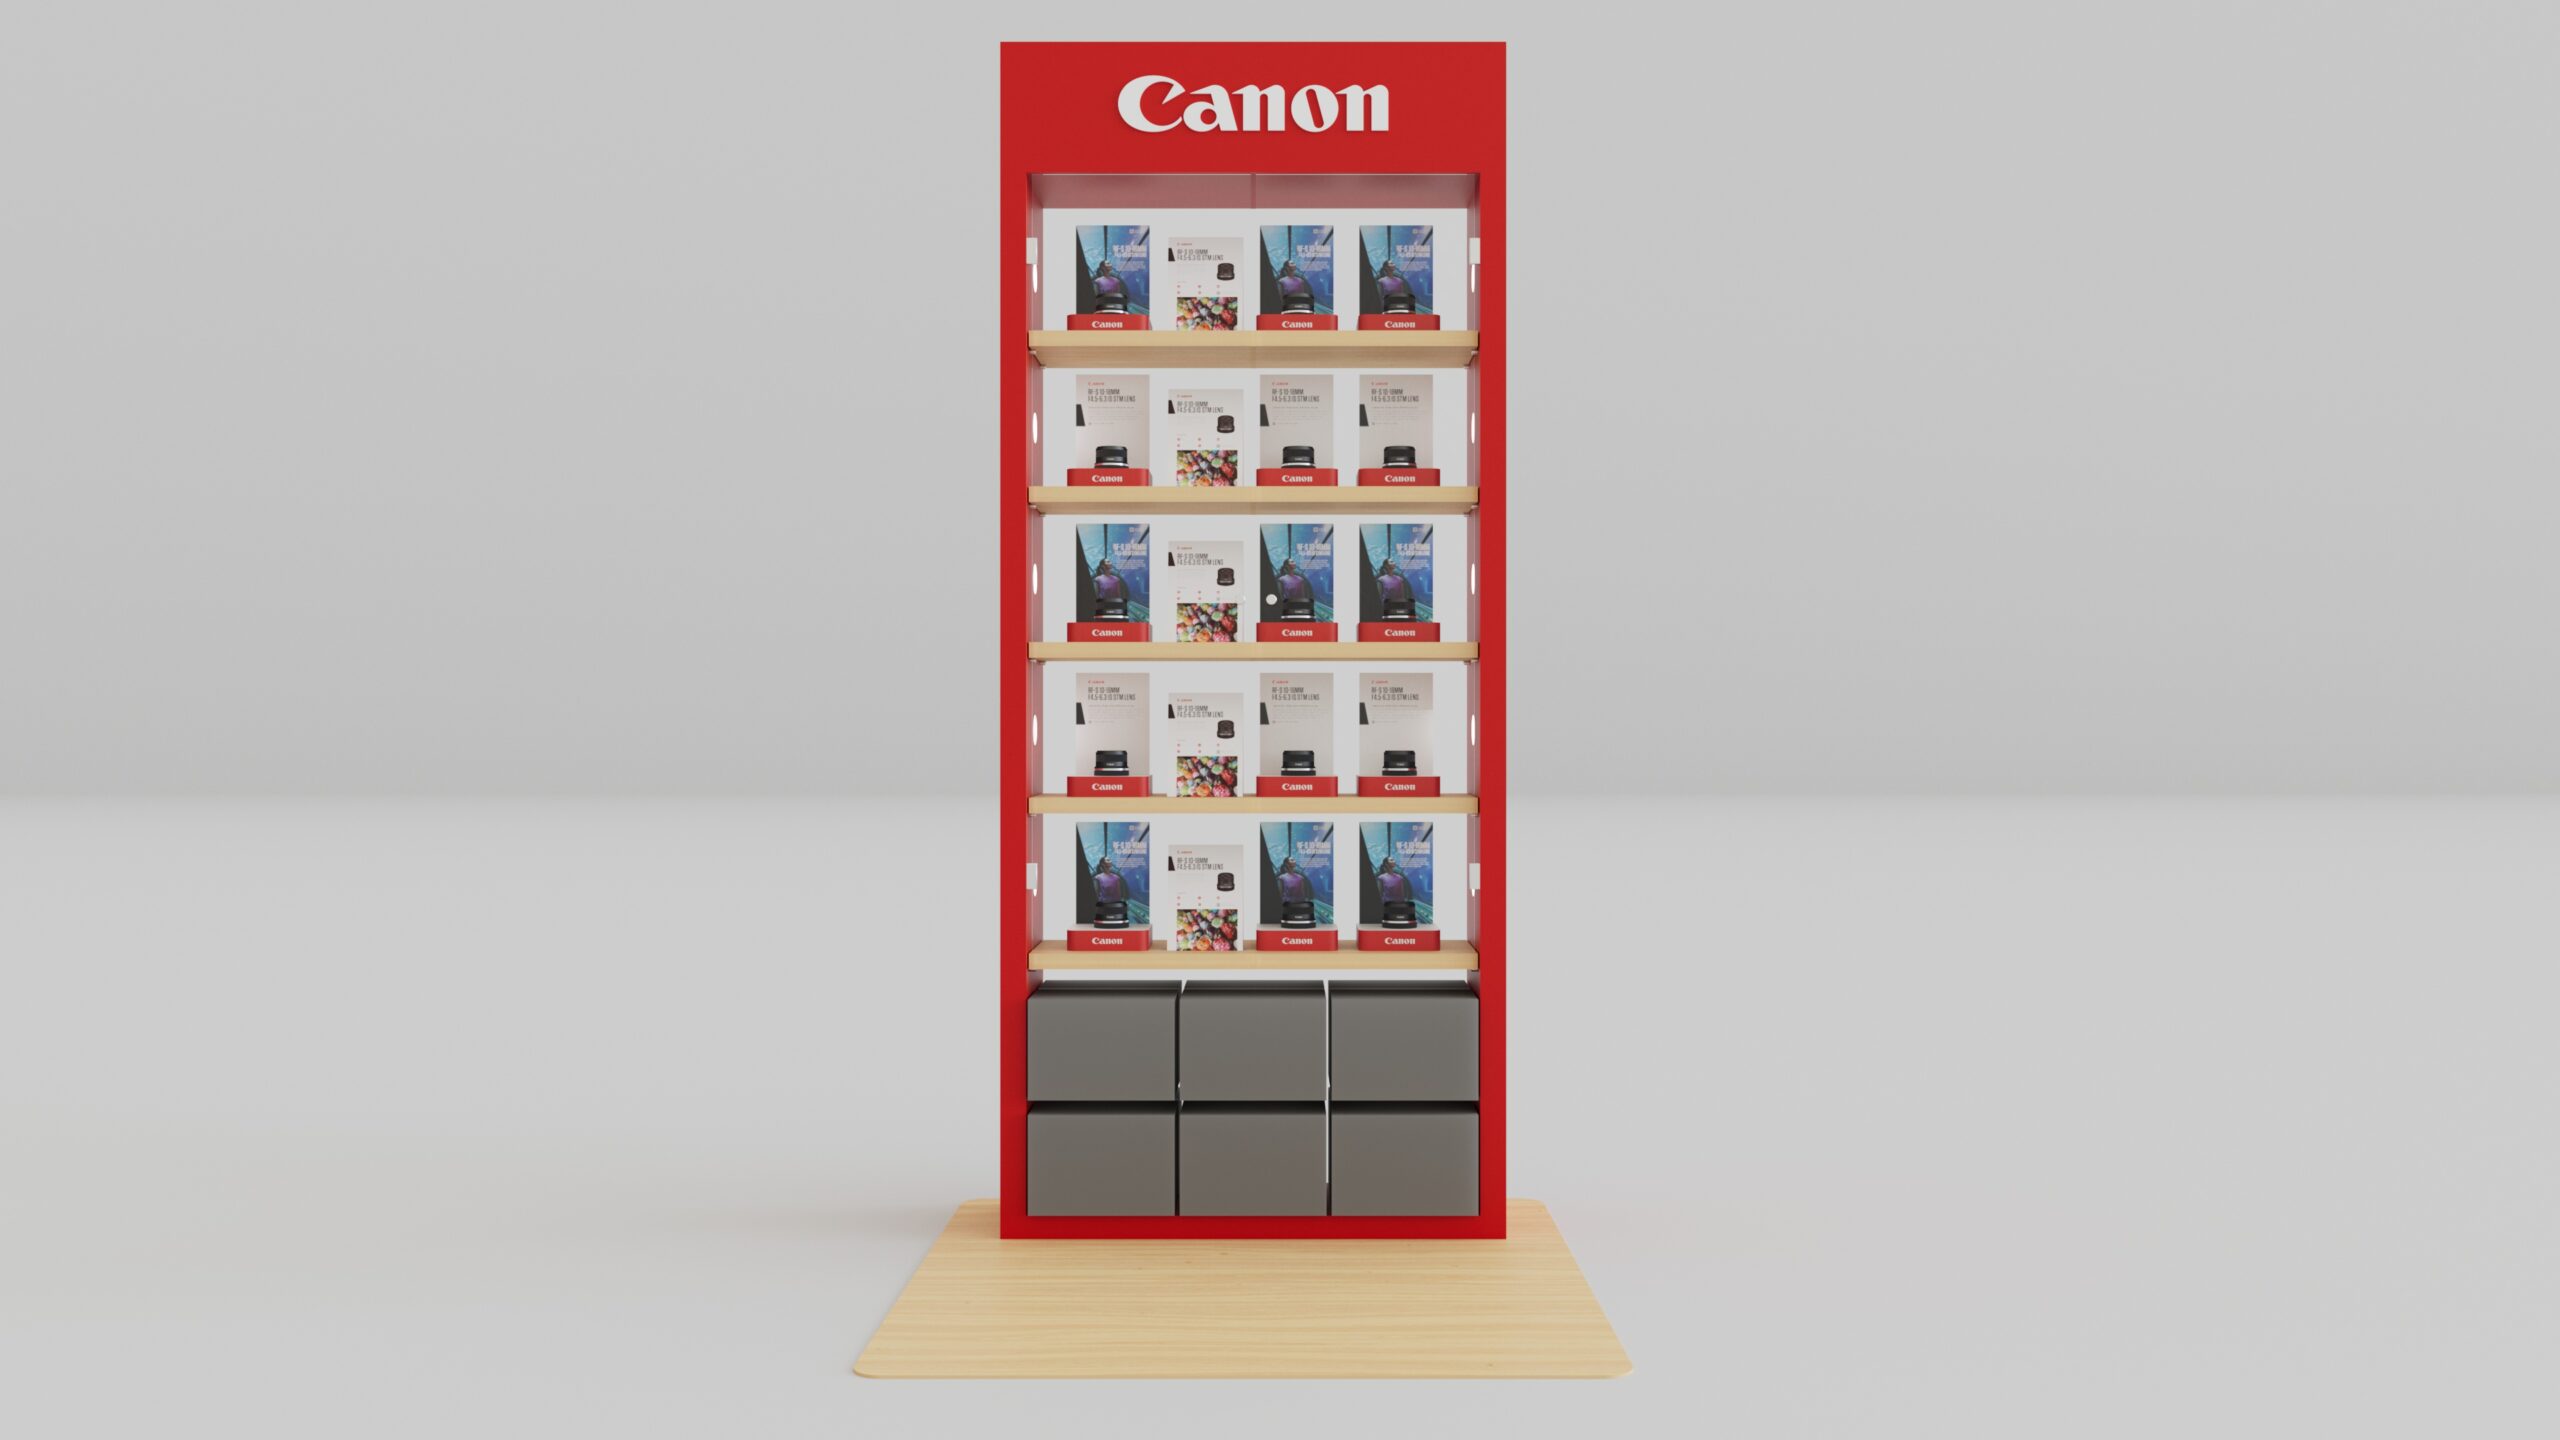 Canon_render_0503_Lens_Cabinet_FRONT_—-MASS